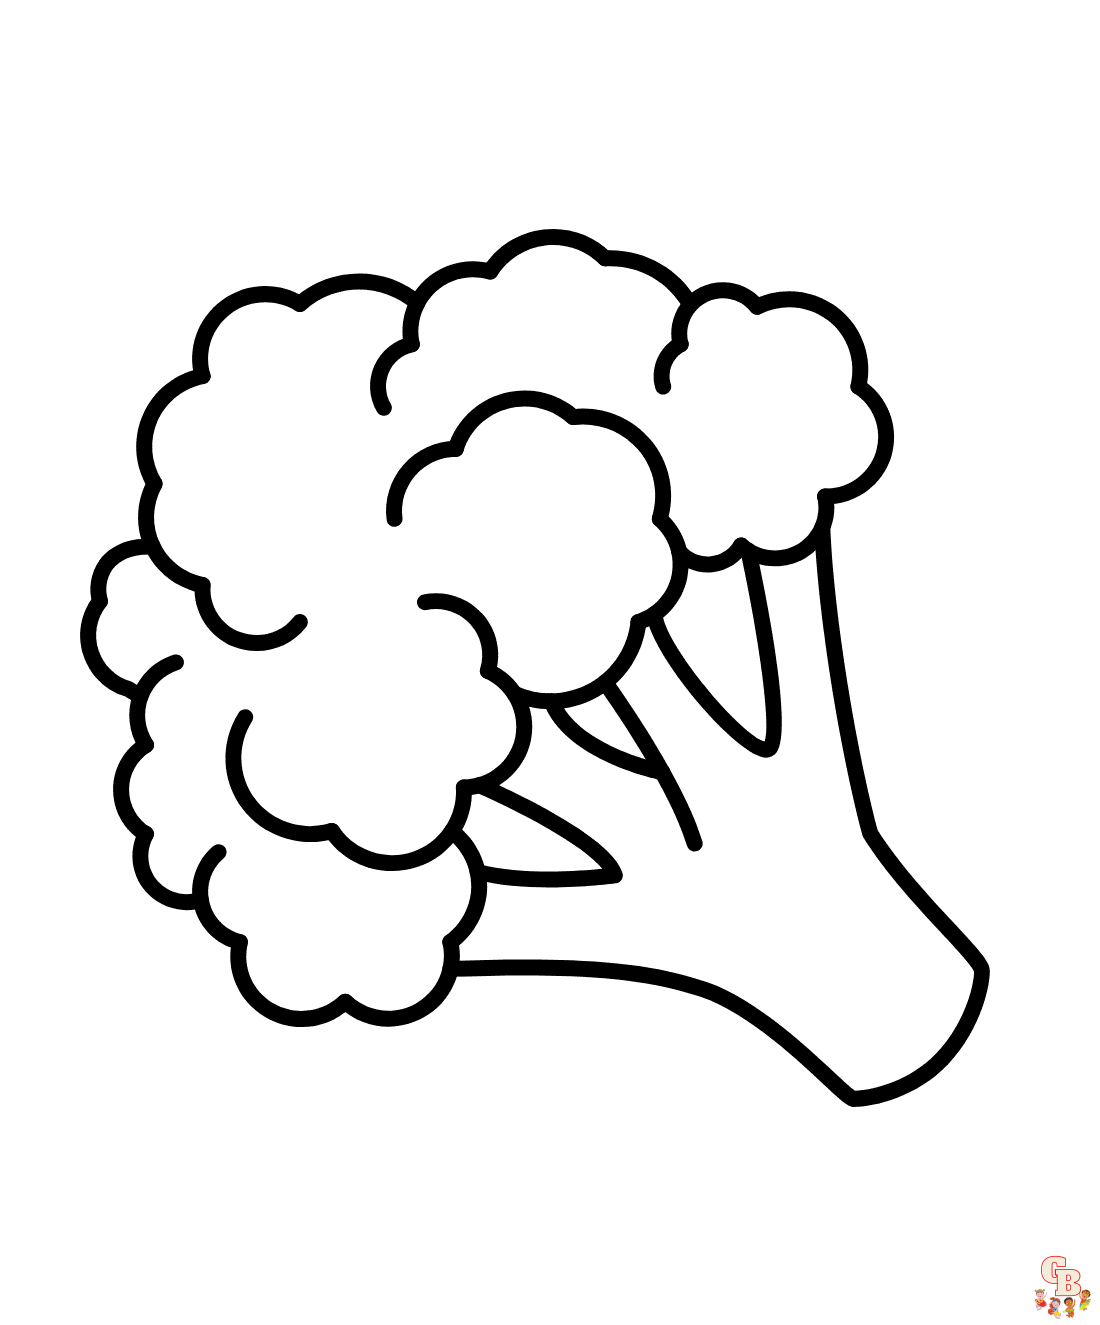 Free Broccoli coloring pages for kids